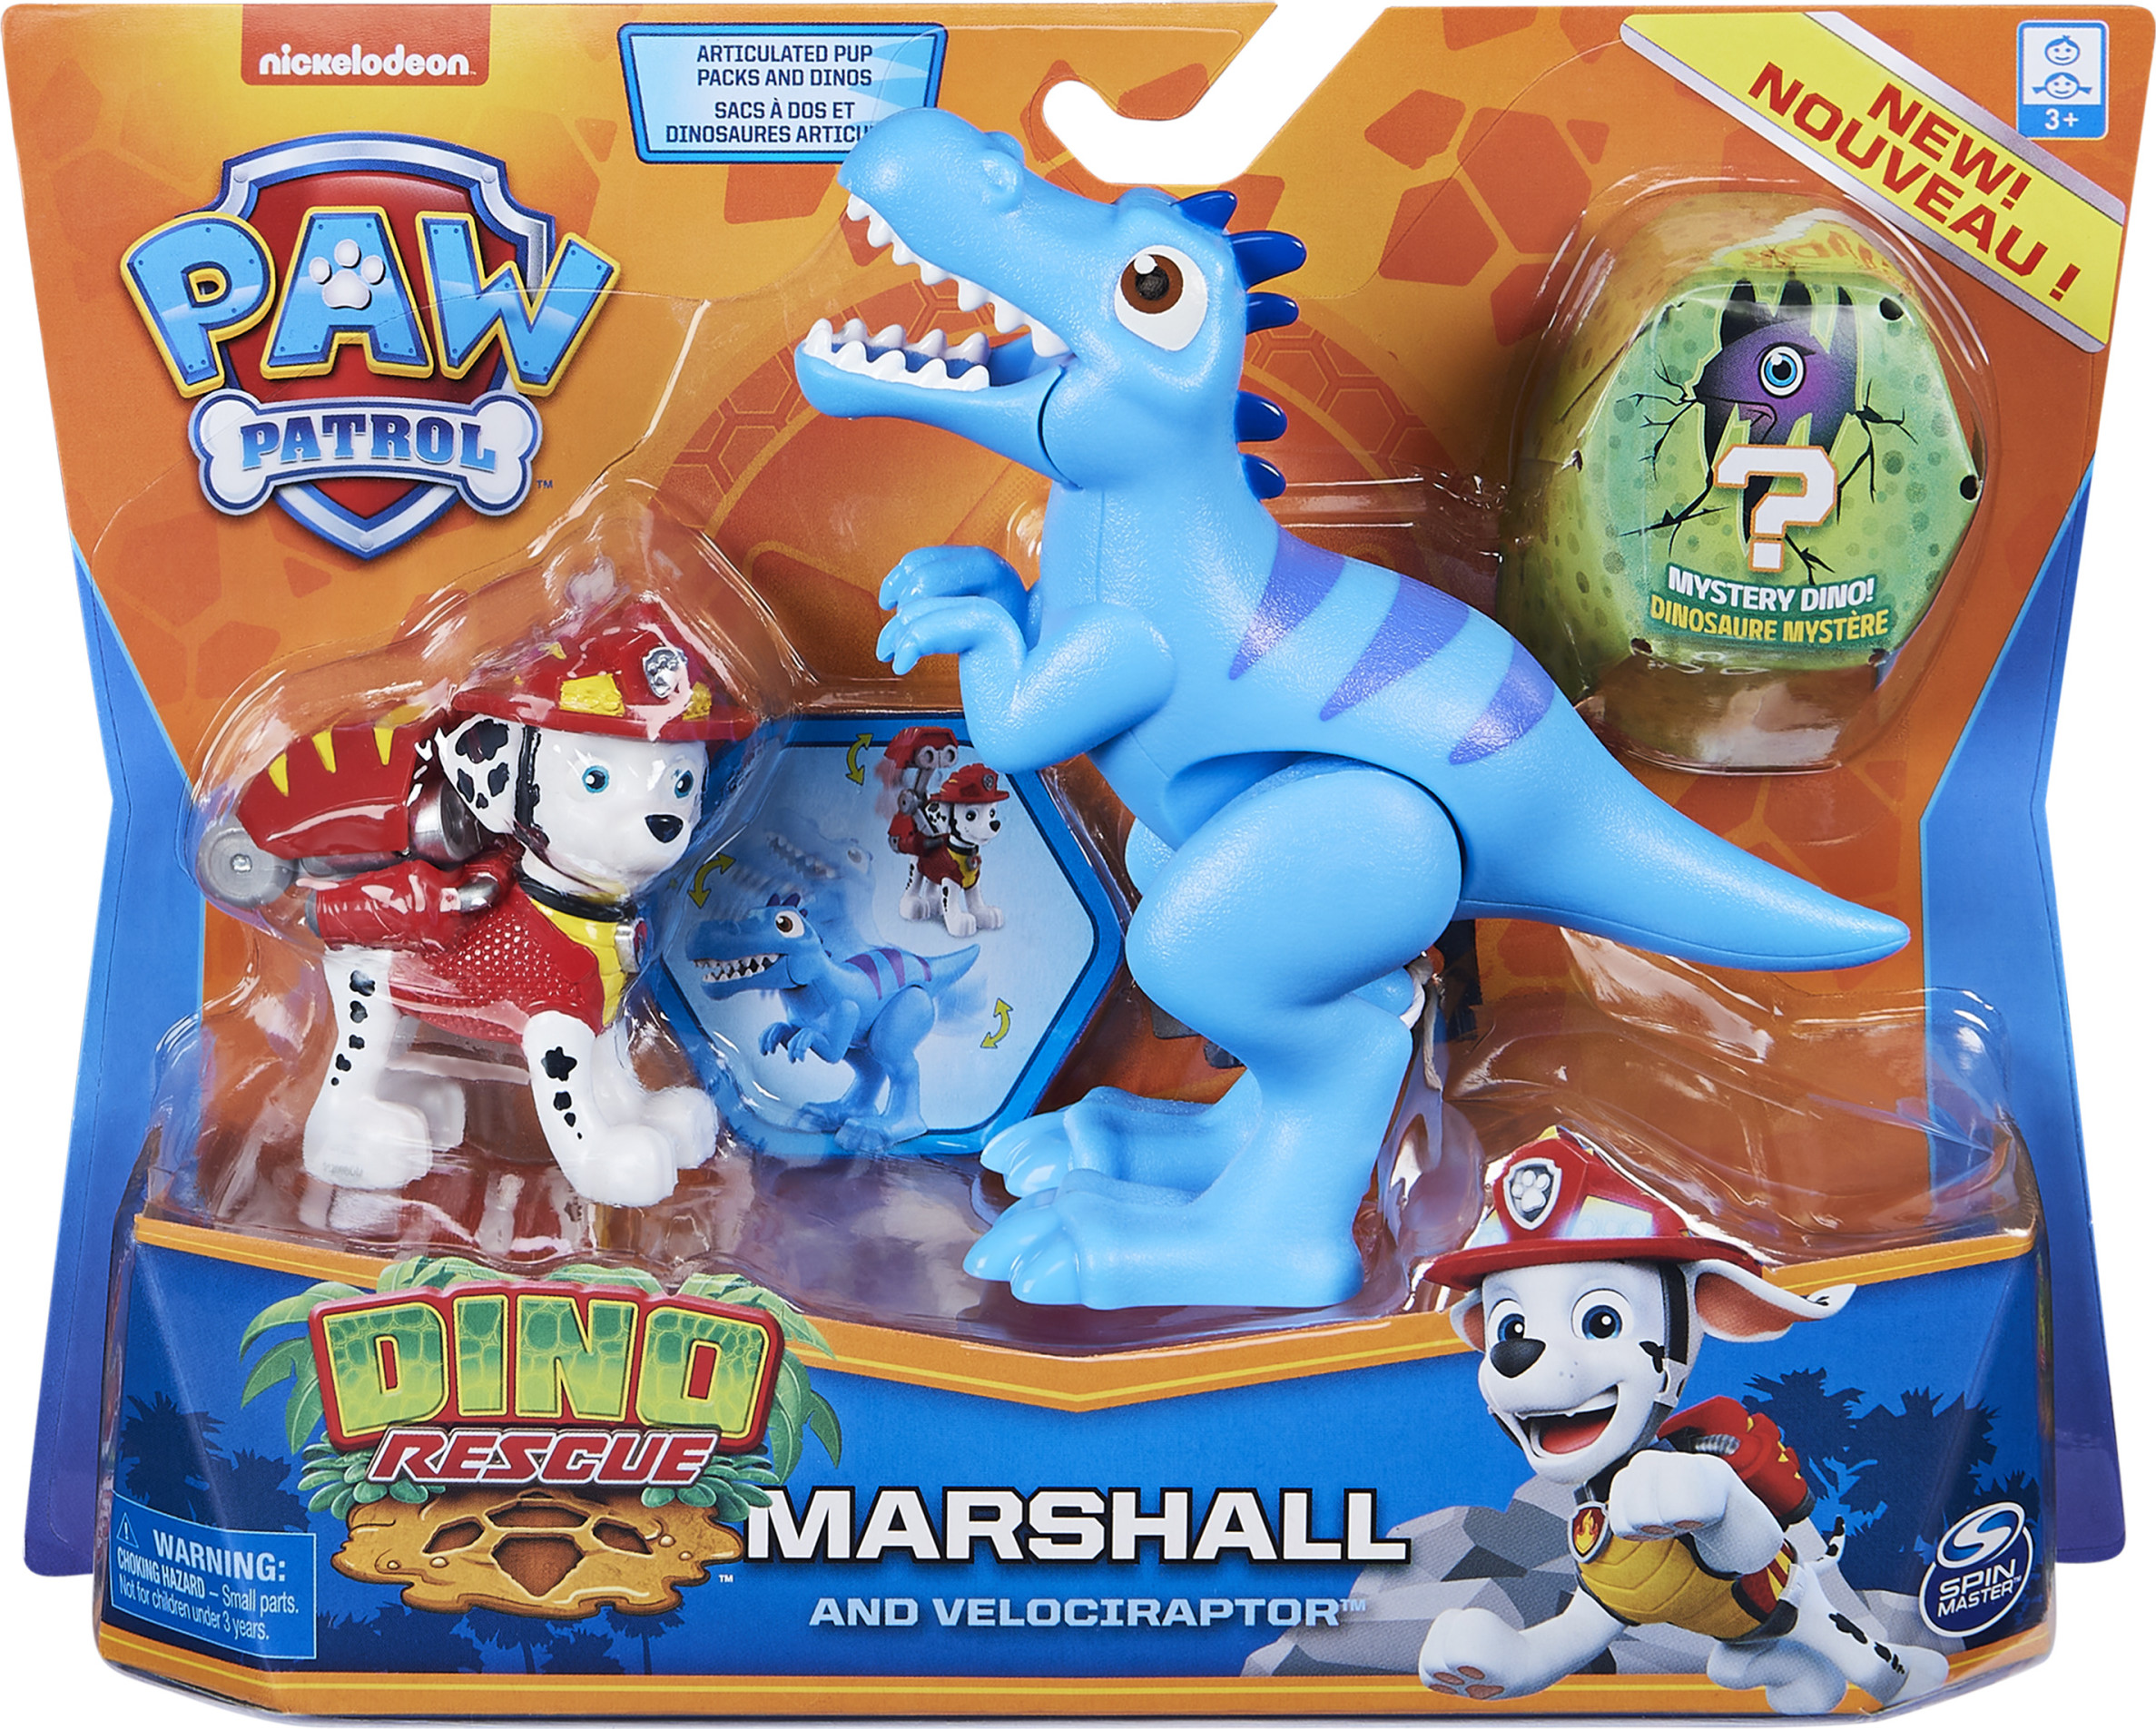 PAW Patrol, Dino Rescue Marshall and Dinosaur Action Figure Set, for Kids Aged 3 and up - image 2 of 5